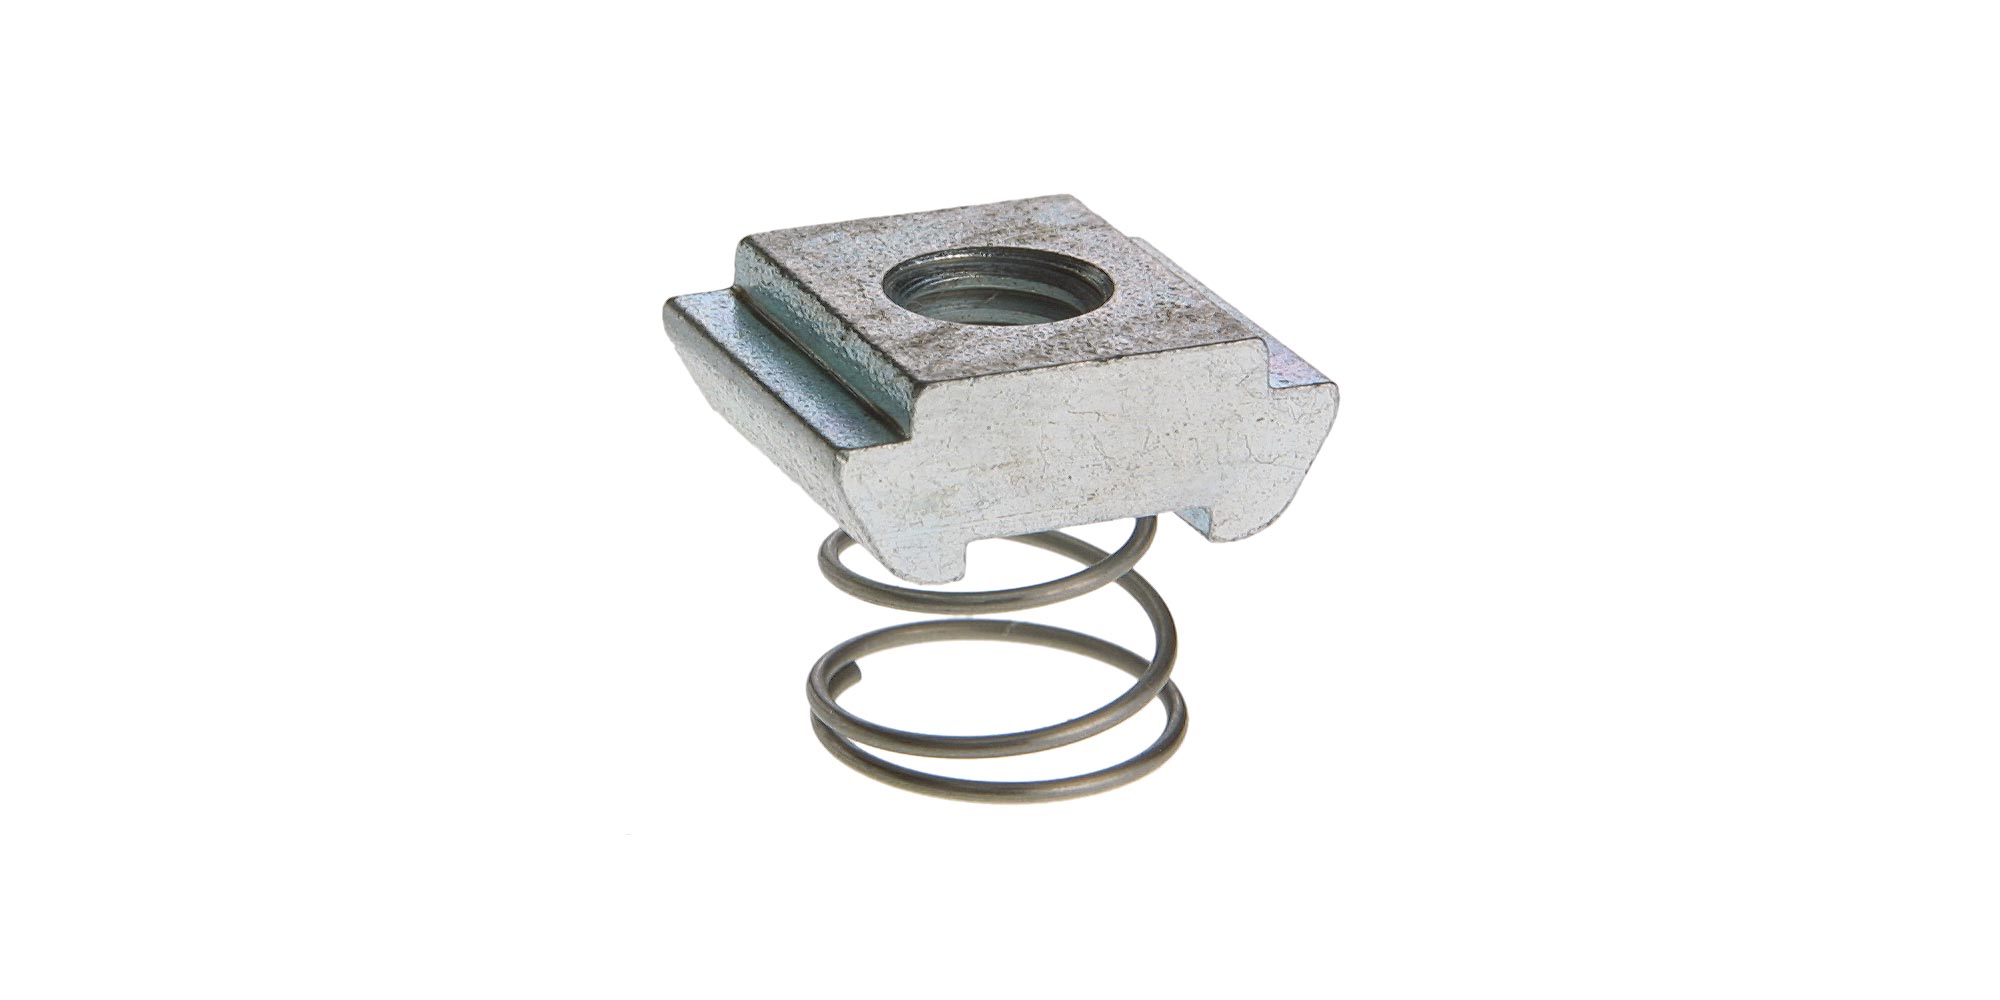 Slot nut C20 M5 galvanized steel, without screw, with spring